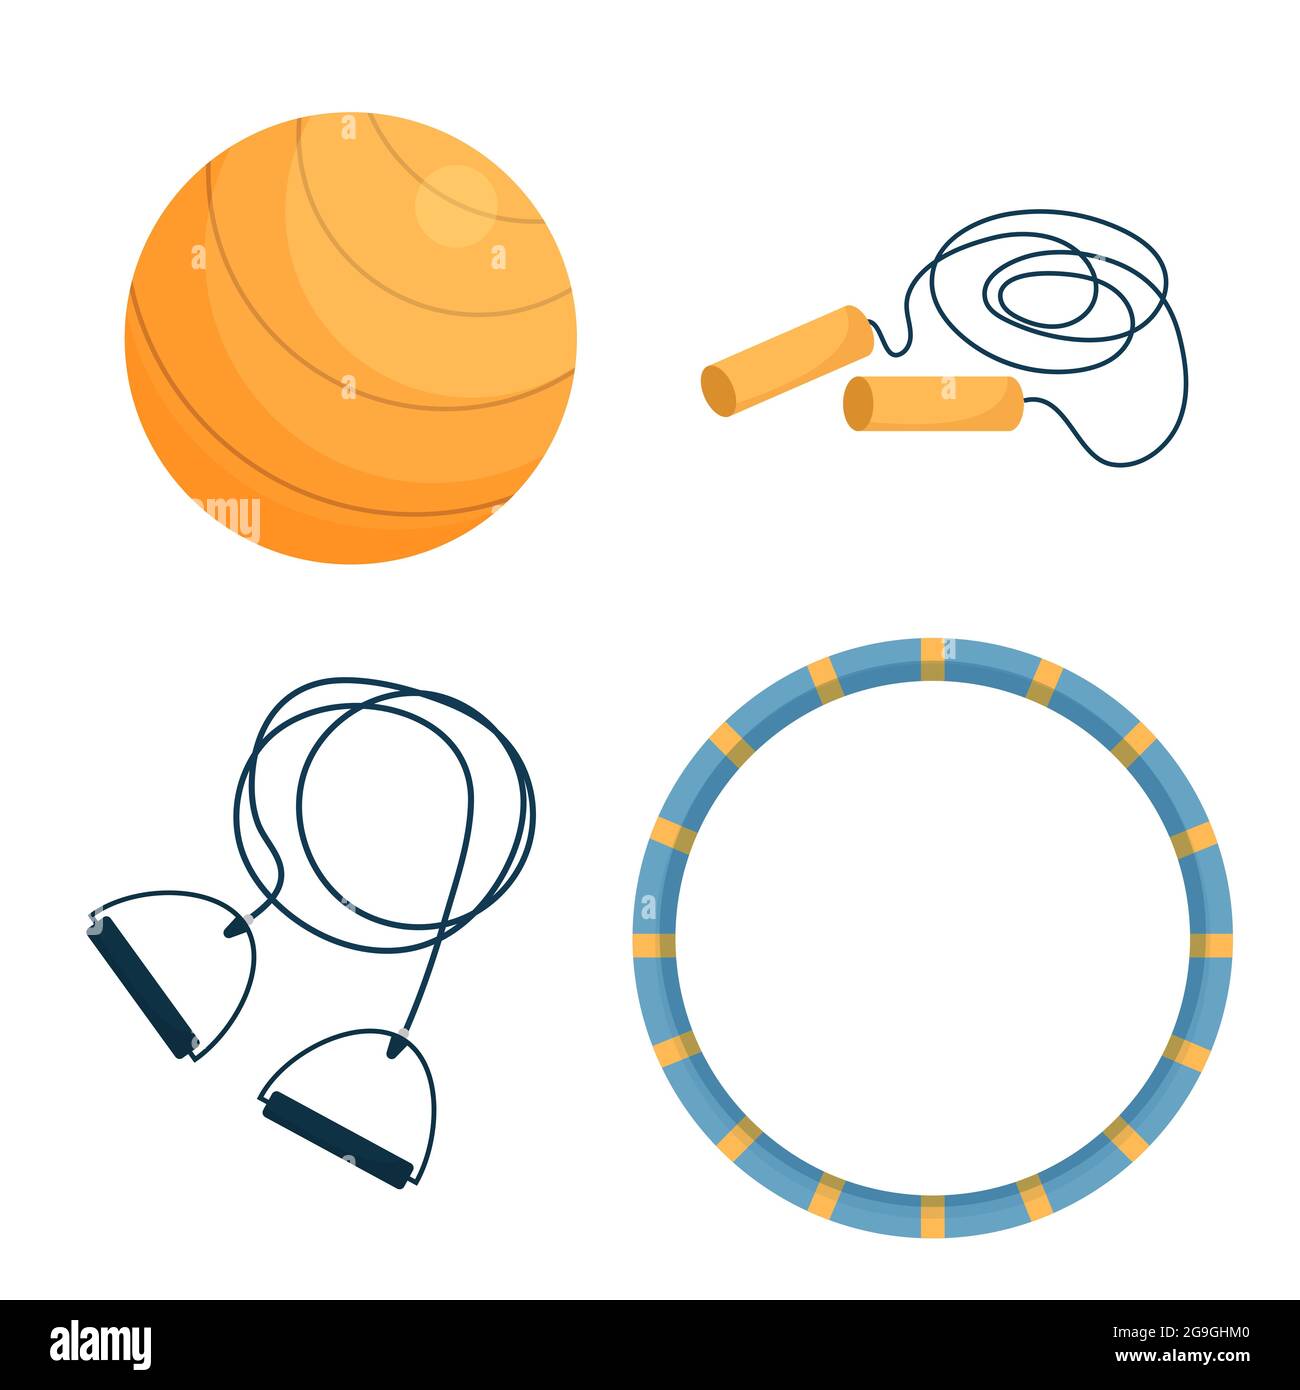 Set workout, training objects fitness ball, expander, skipping rope and hula hoop isolated on white background. Equipment for wellness and healthy lifestyle. Vector illustration Stock Vector